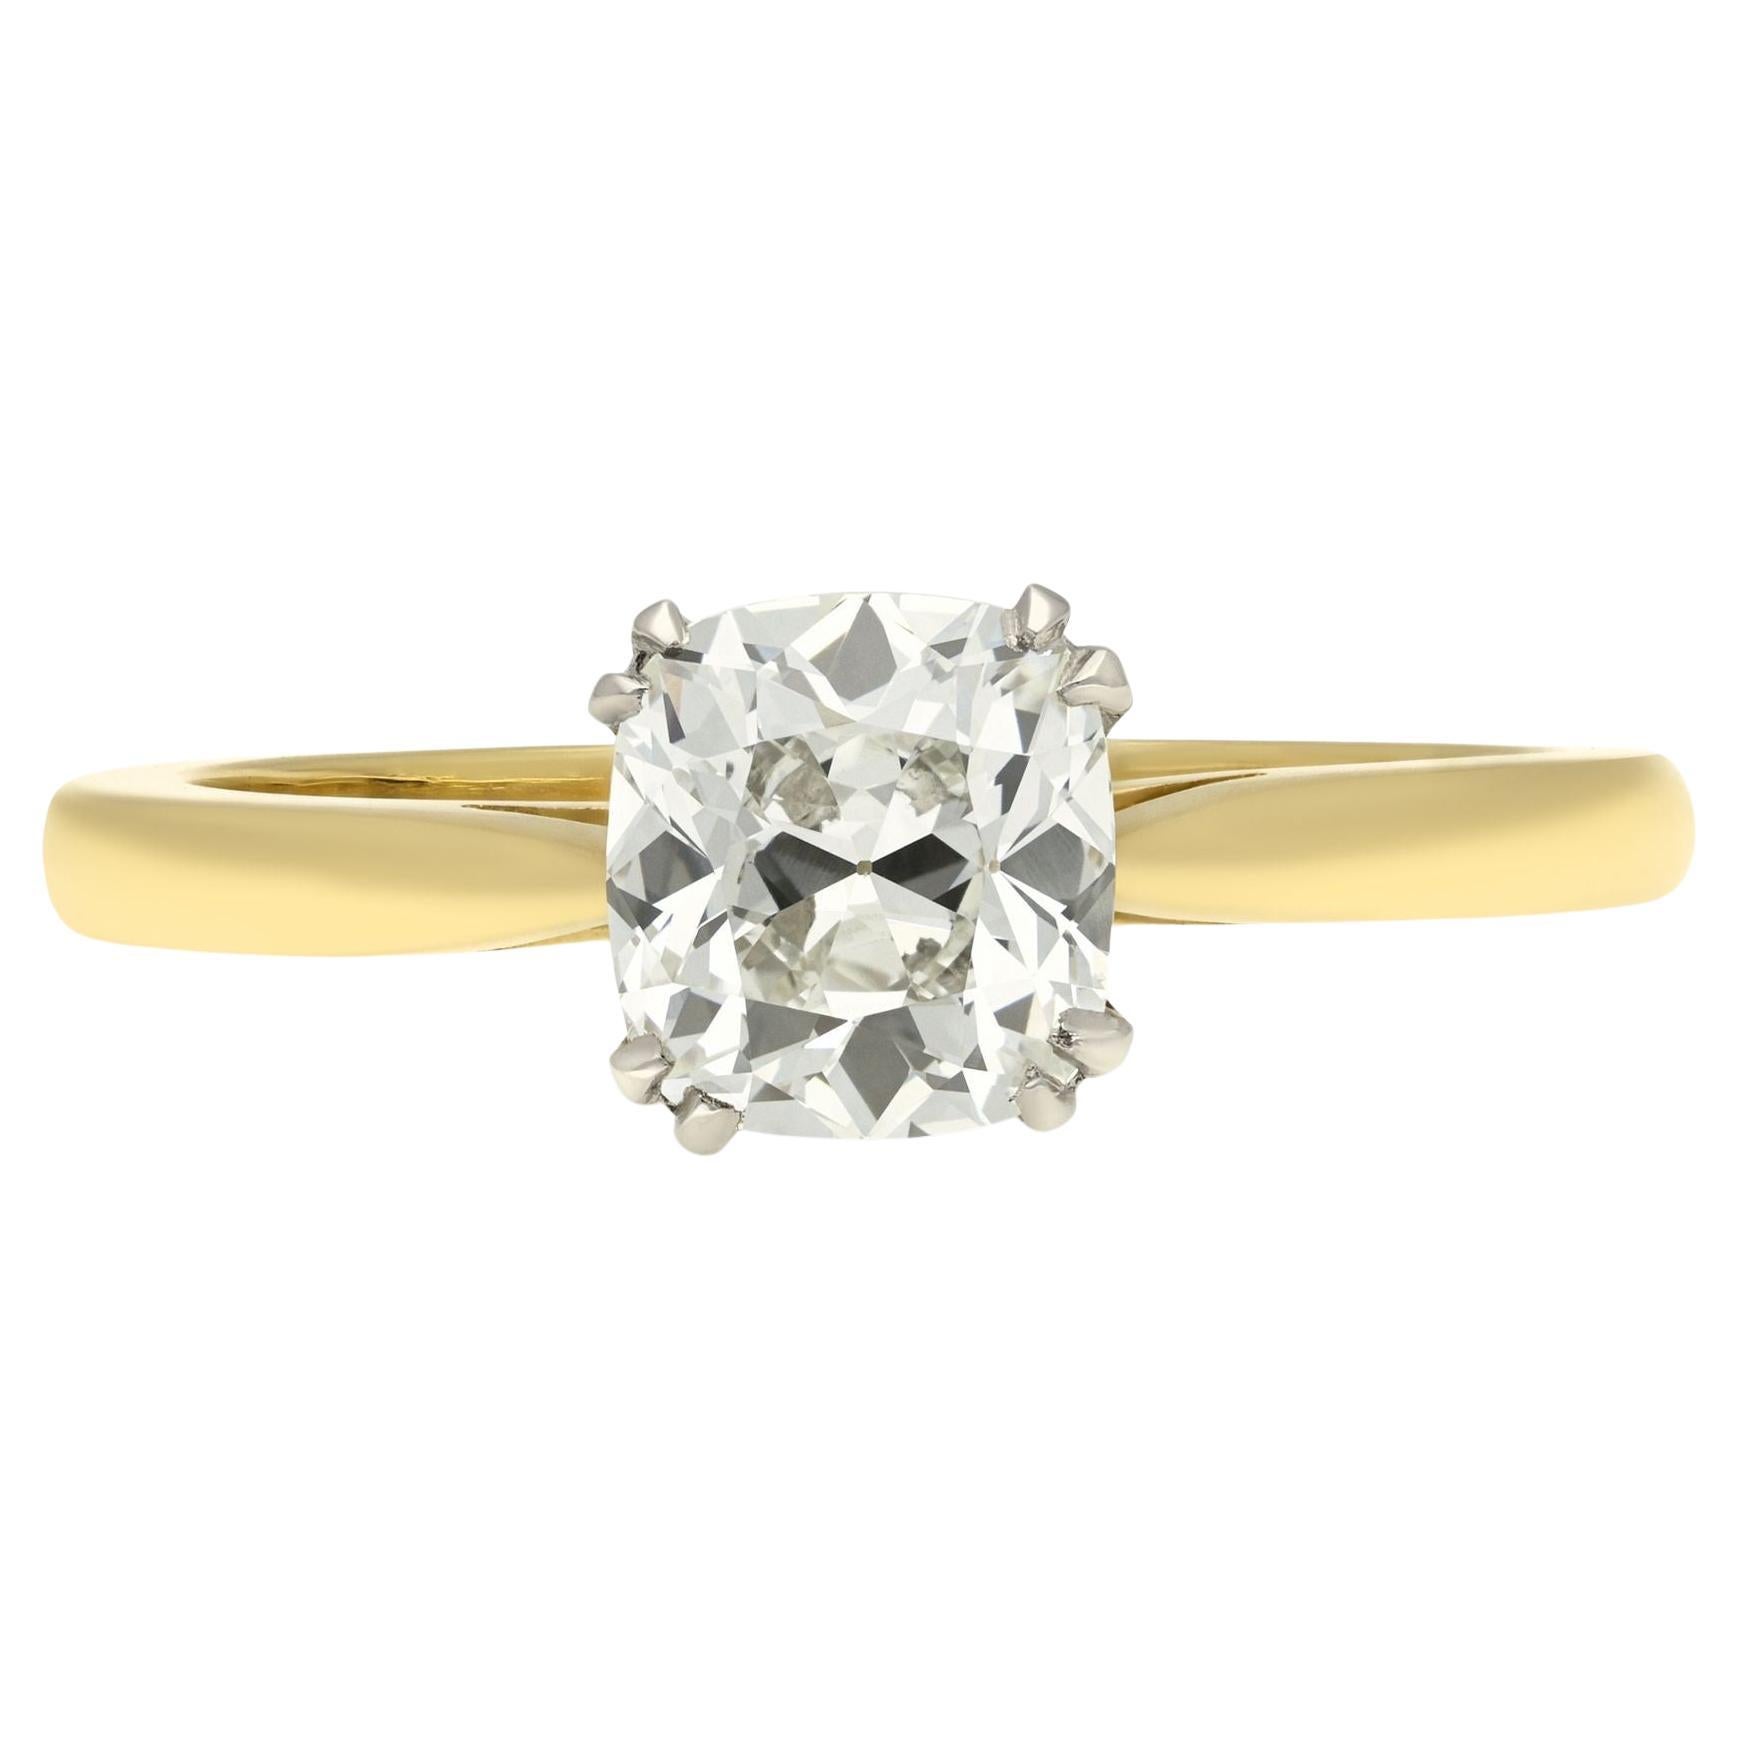 Hancocks 1.12ct Old Mine Cushion Cut Diamond and 18ct Yellow Gold Solitaire Ring (Bague solitaire en or jaune 18ct)